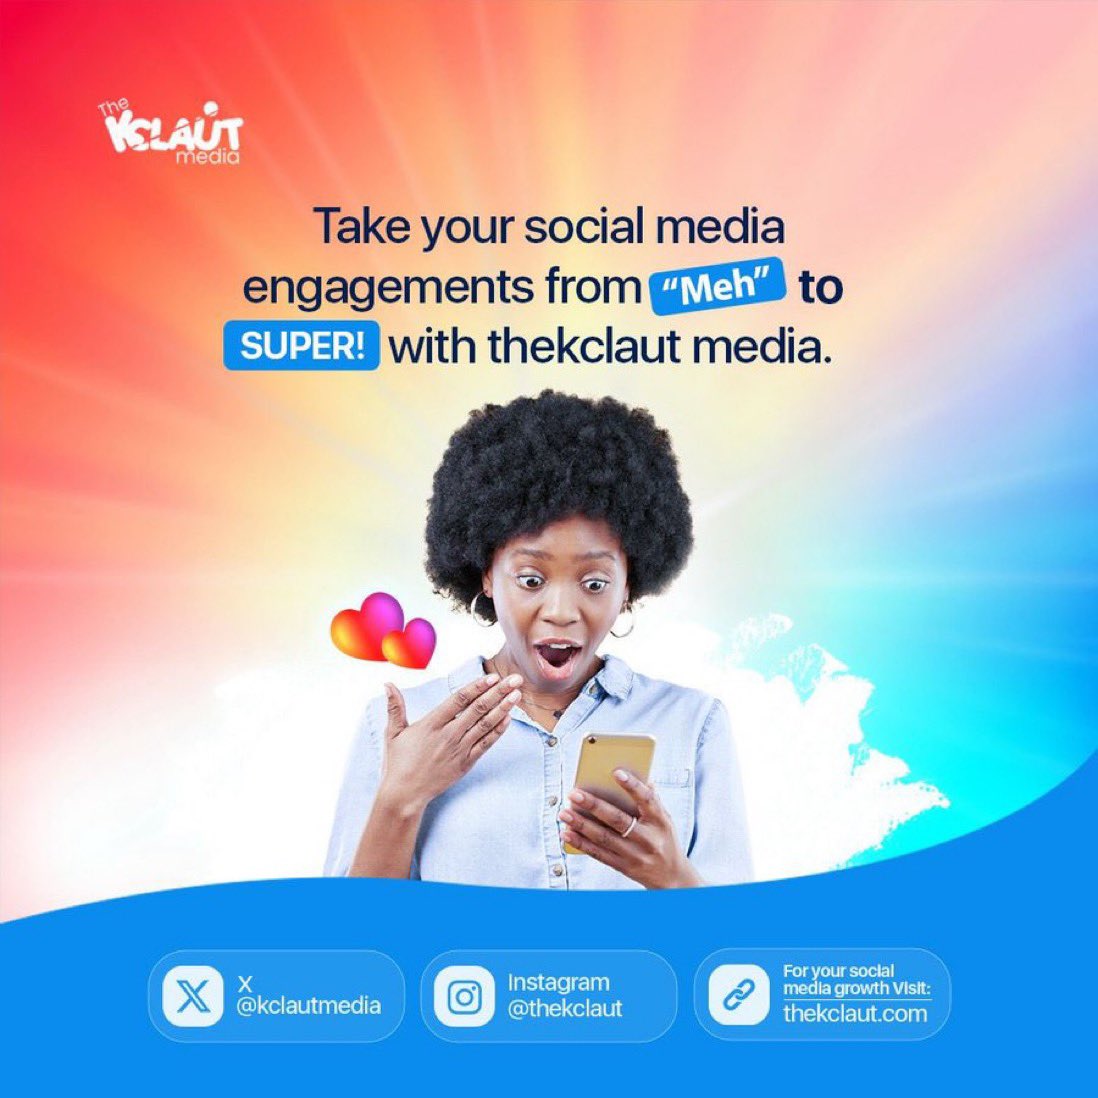 Improving your social media presence and engagements is very easy with Kclaut media, they help grow your brand visibility.💯 Visit: thekclaut.com to get started today😁